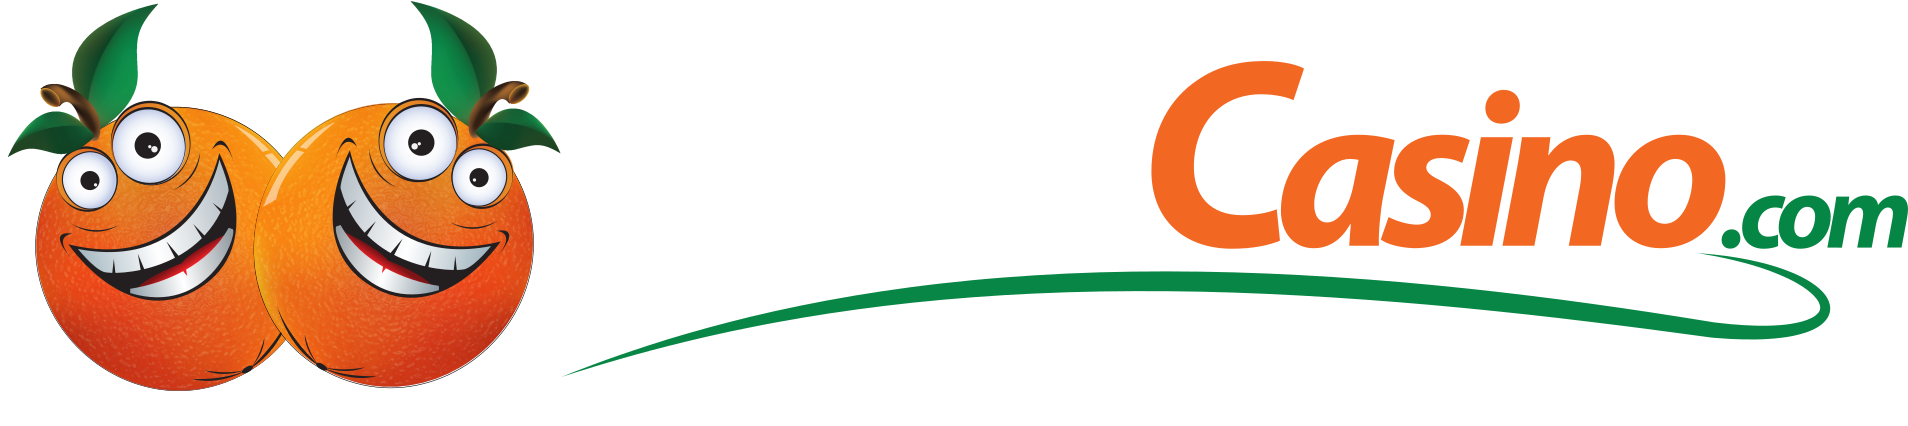 Casino as One of the Finest Online Gambling Sites with bitcoin